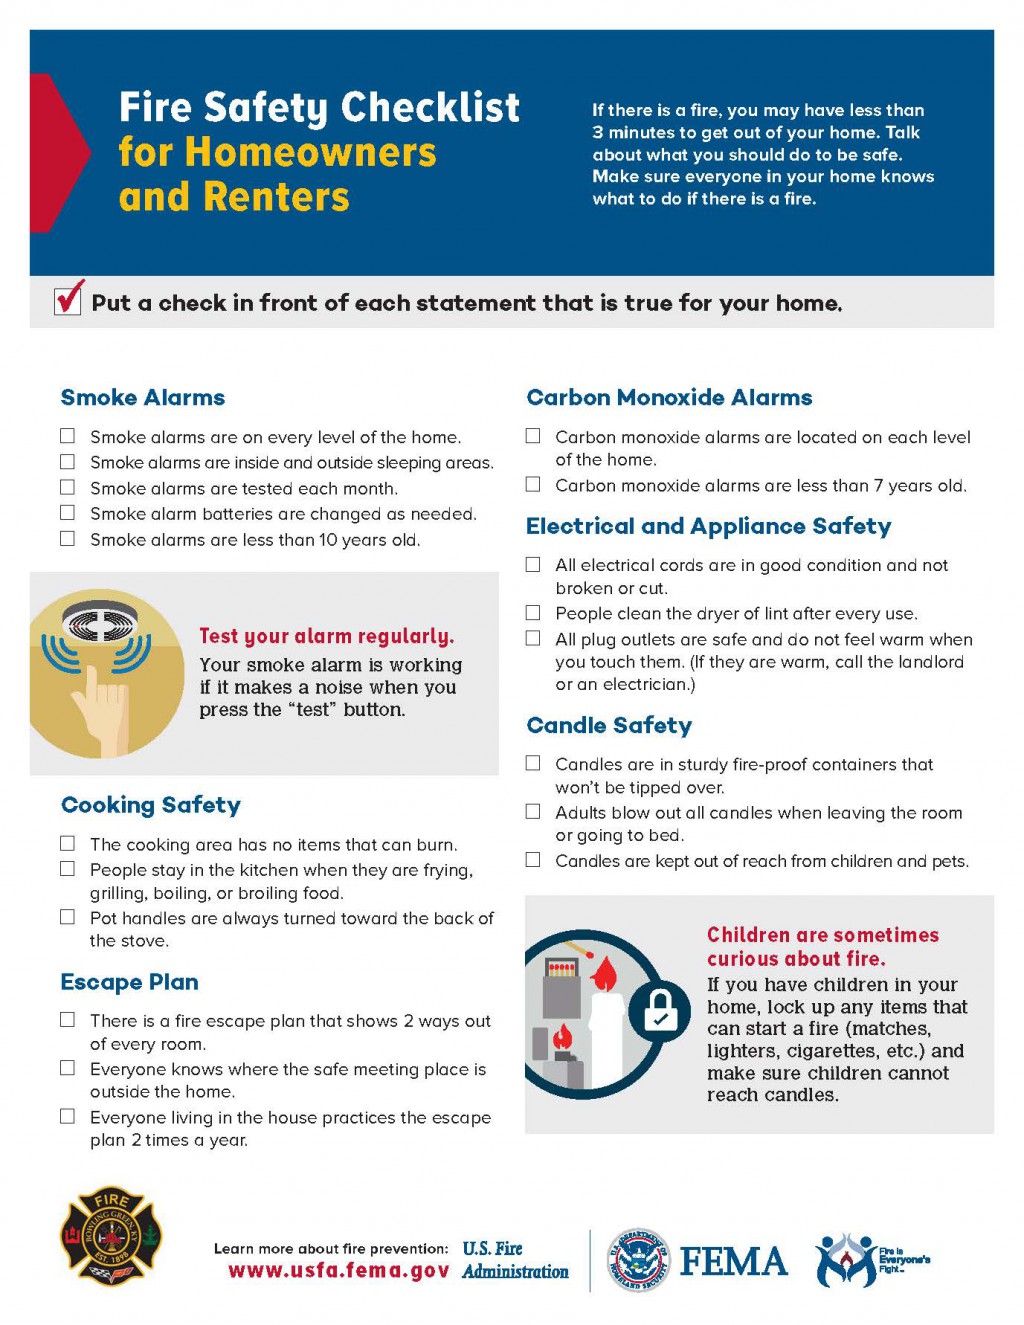 Fire Safety Checklist for Homeowners and Renters English